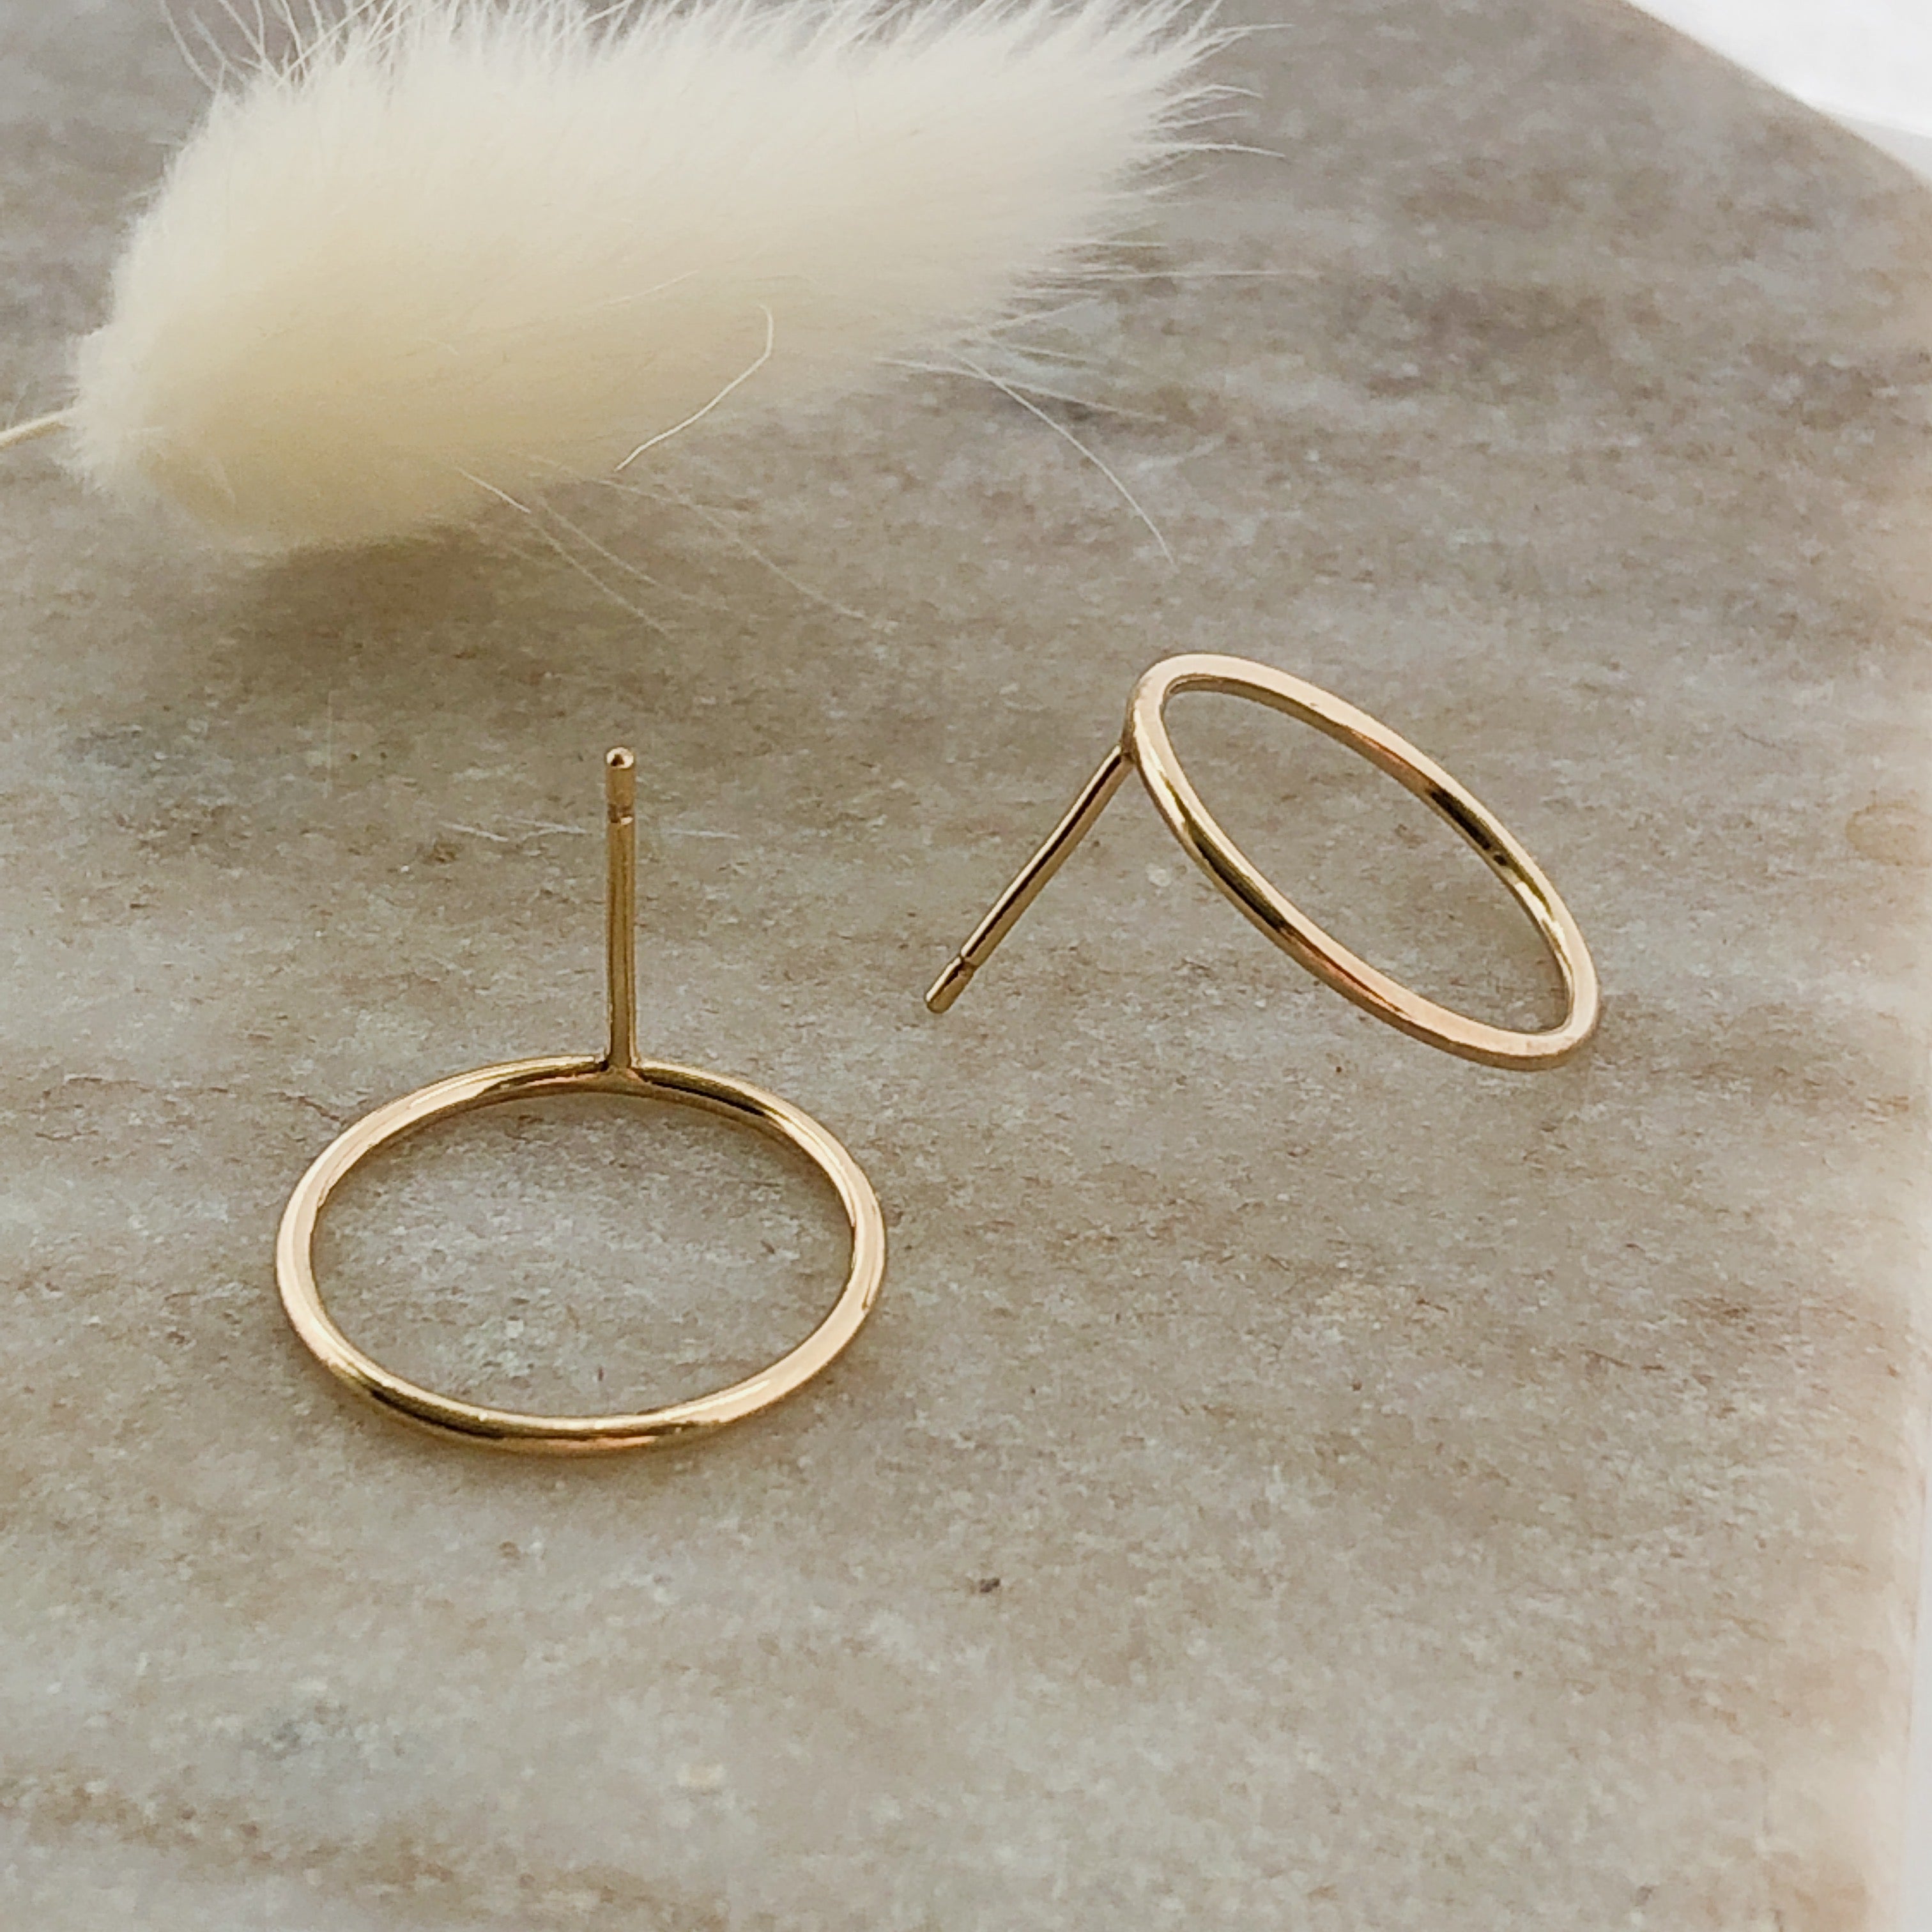 New Moon Studs: Gold